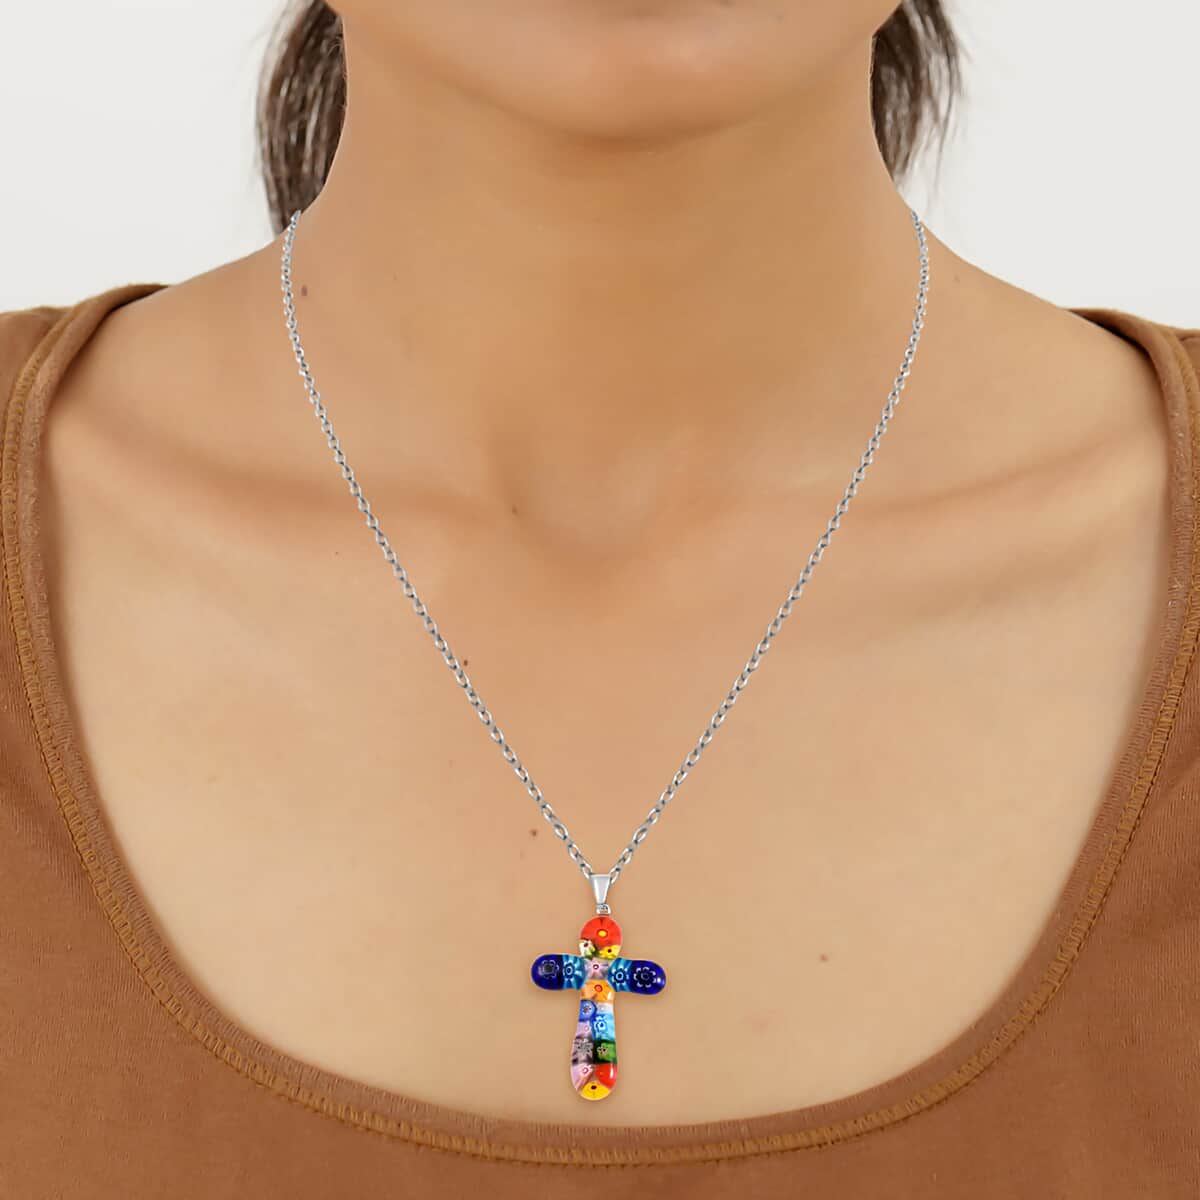 Multi Color Murano Style Cross Pendant Beaded Necklace 20 Inches in Stainless Steel, Floral Millefiori Pendant Necklace, Sweatproof Hypoallergenic Necklace, Gift For Her image number 2